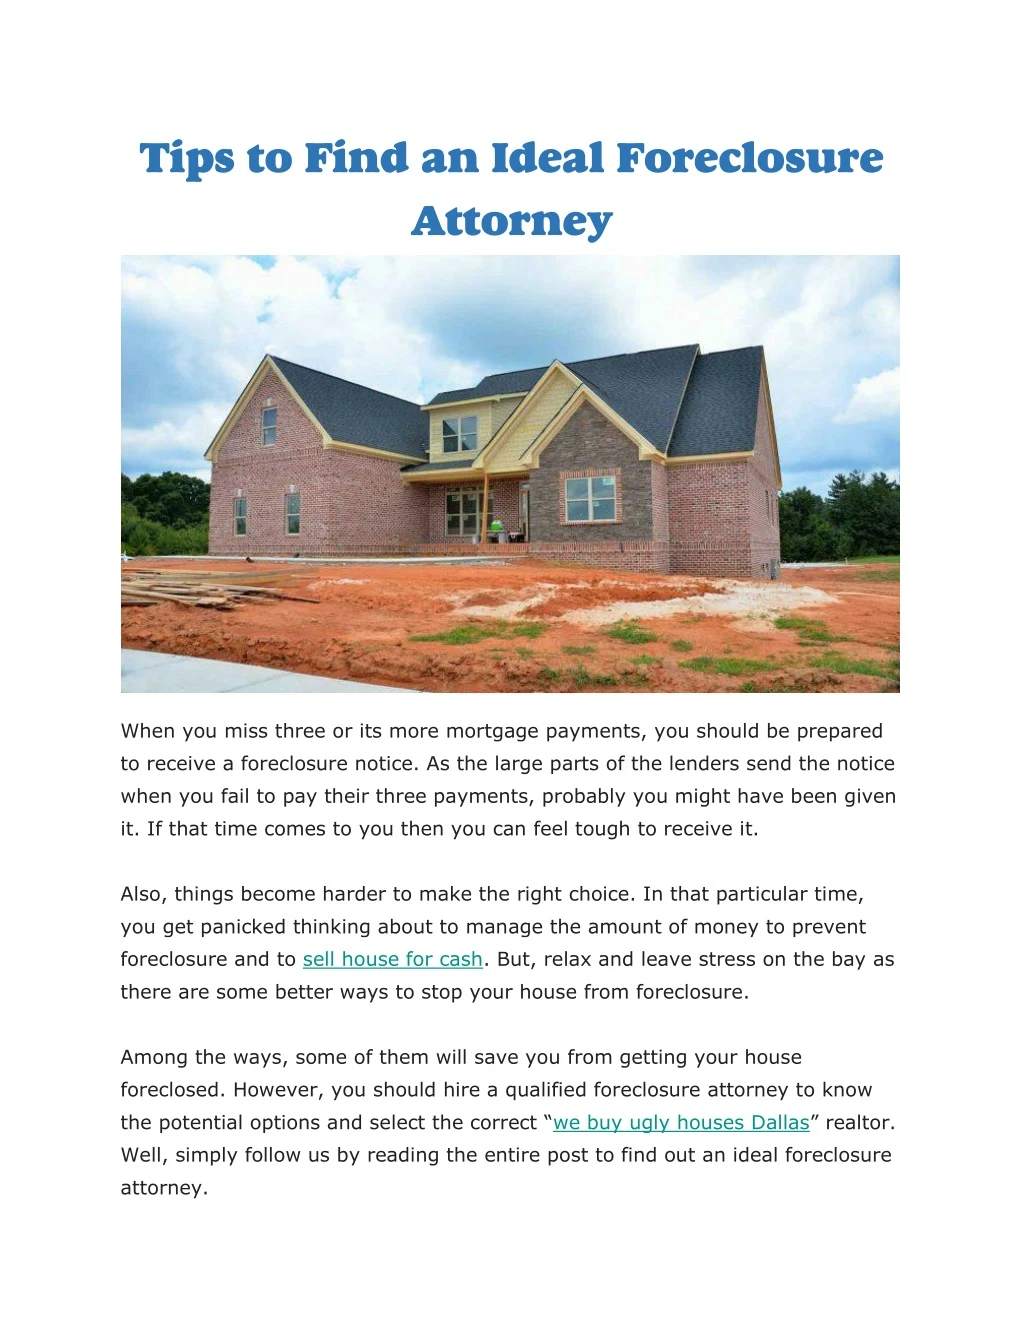 tips to find an ideal foreclosure attorney